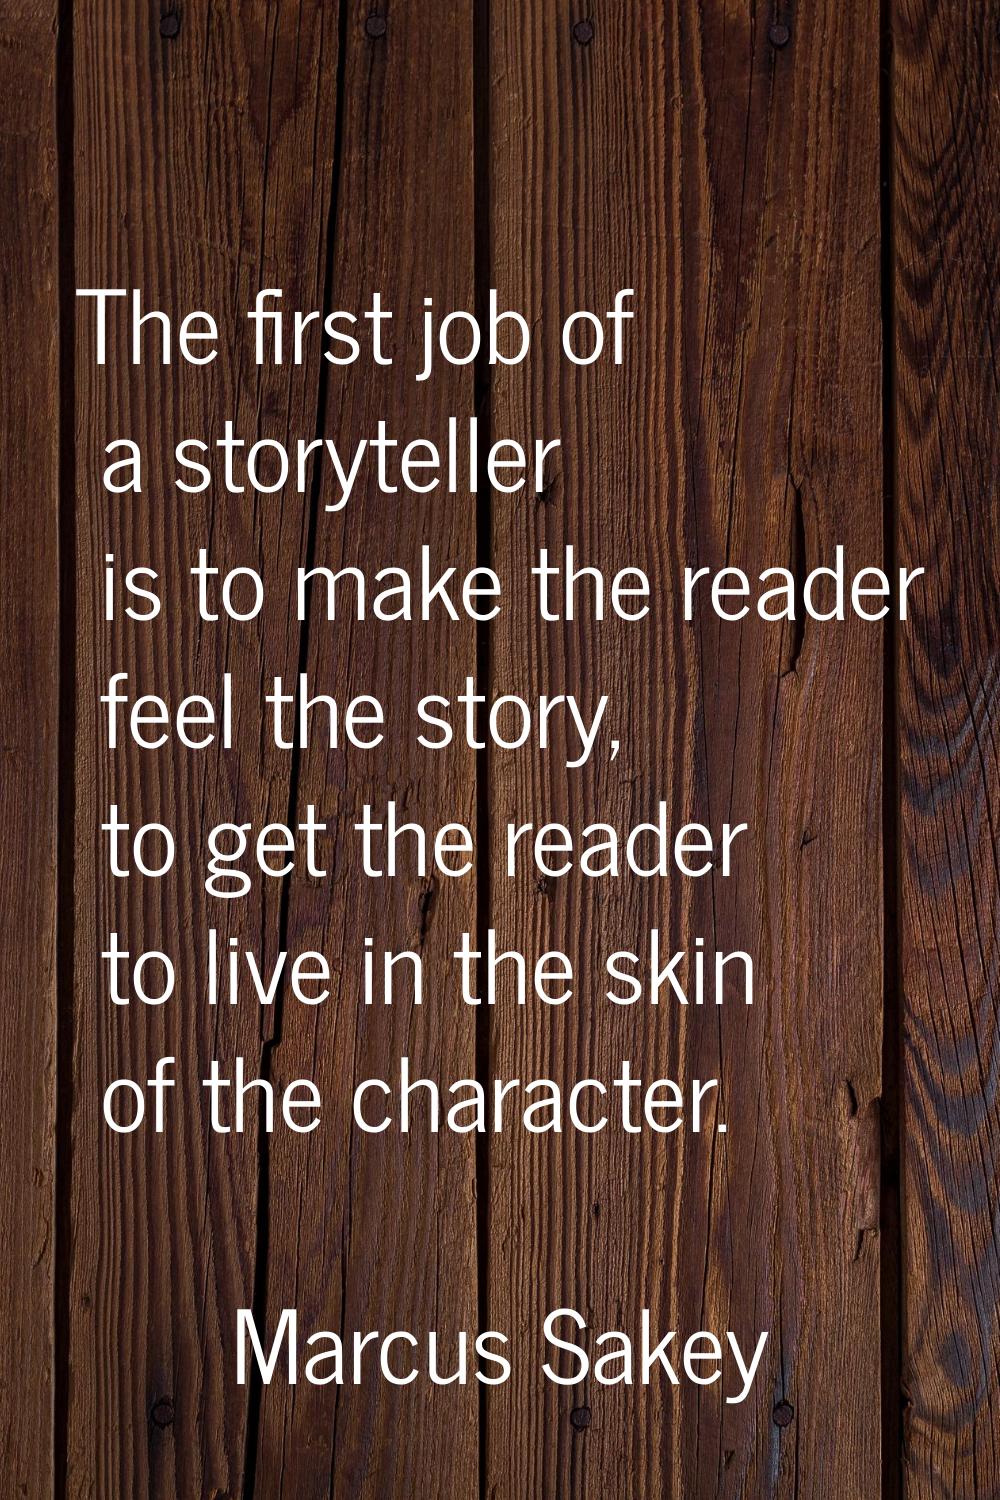 The first job of a storyteller is to make the reader feel the story, to get the reader to live in t